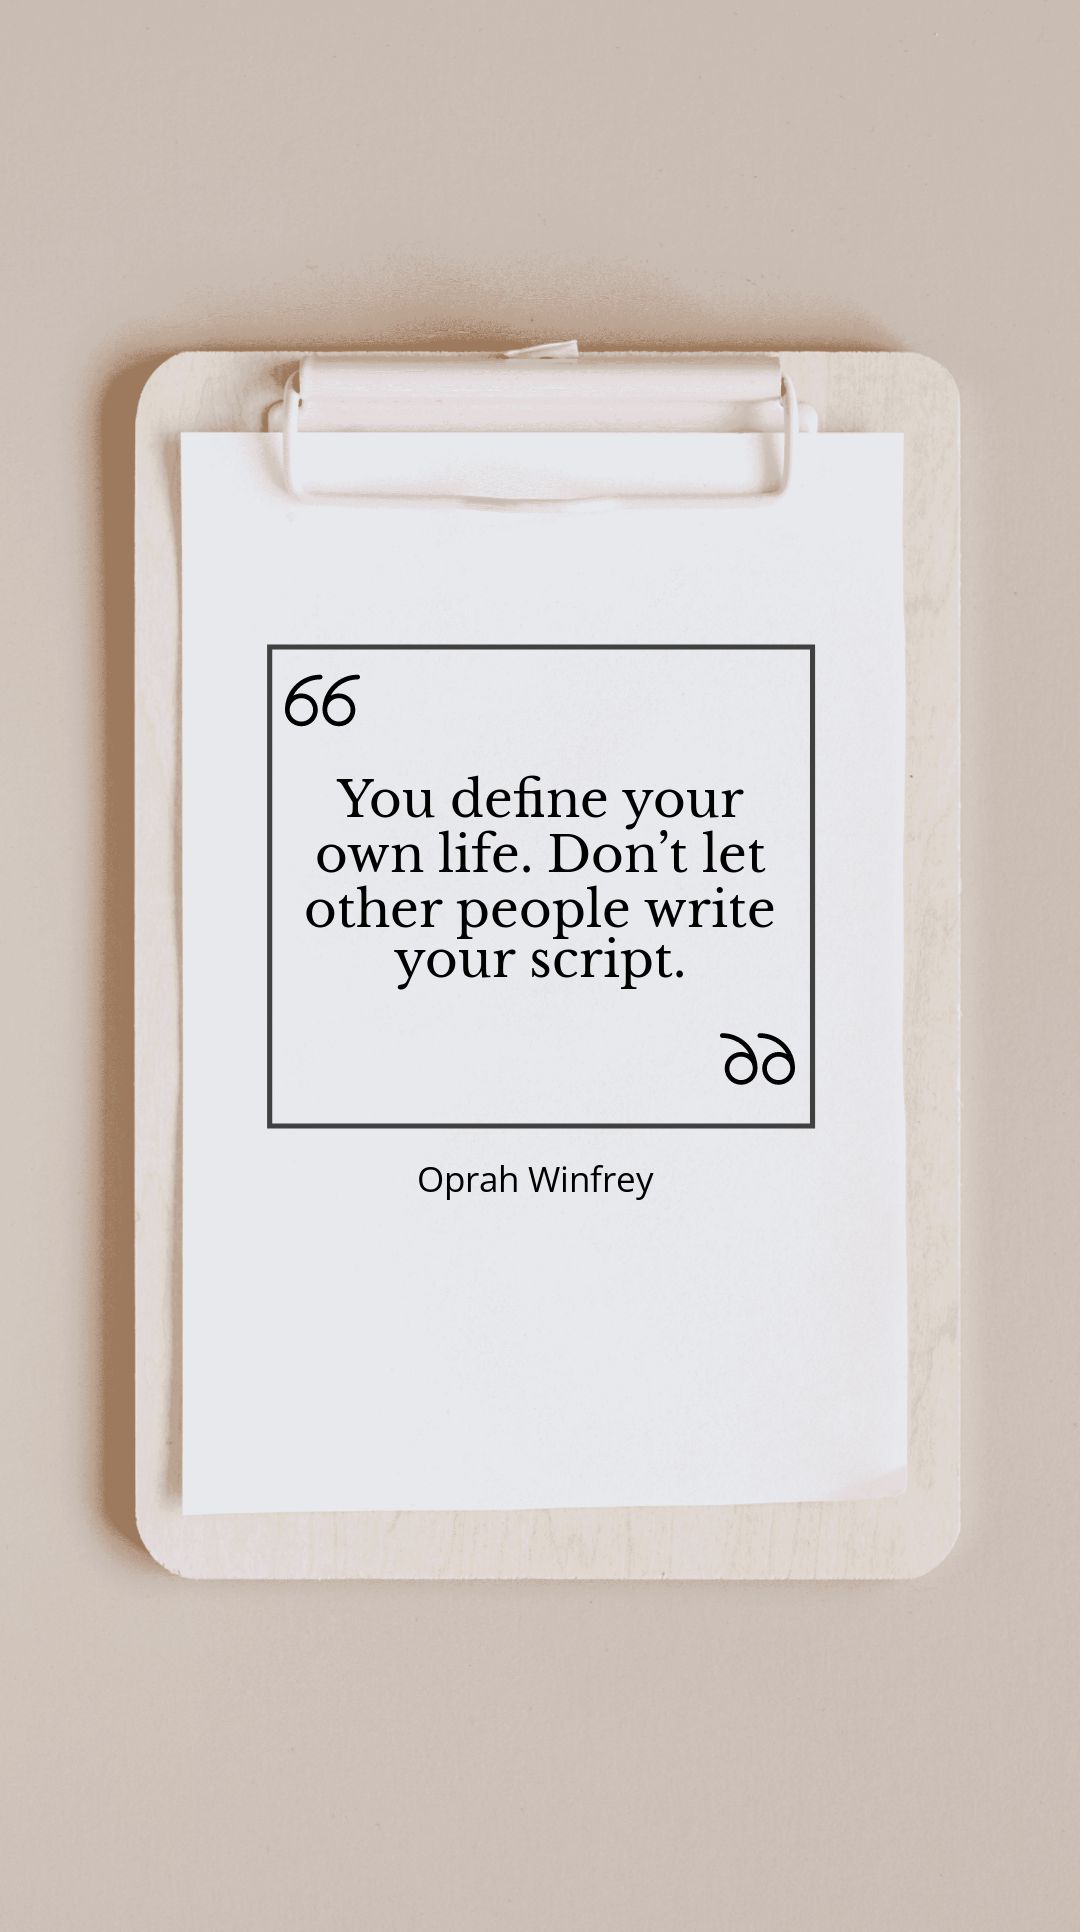 Oprah Winfrey - You define your own life. Don’t let other people write your script